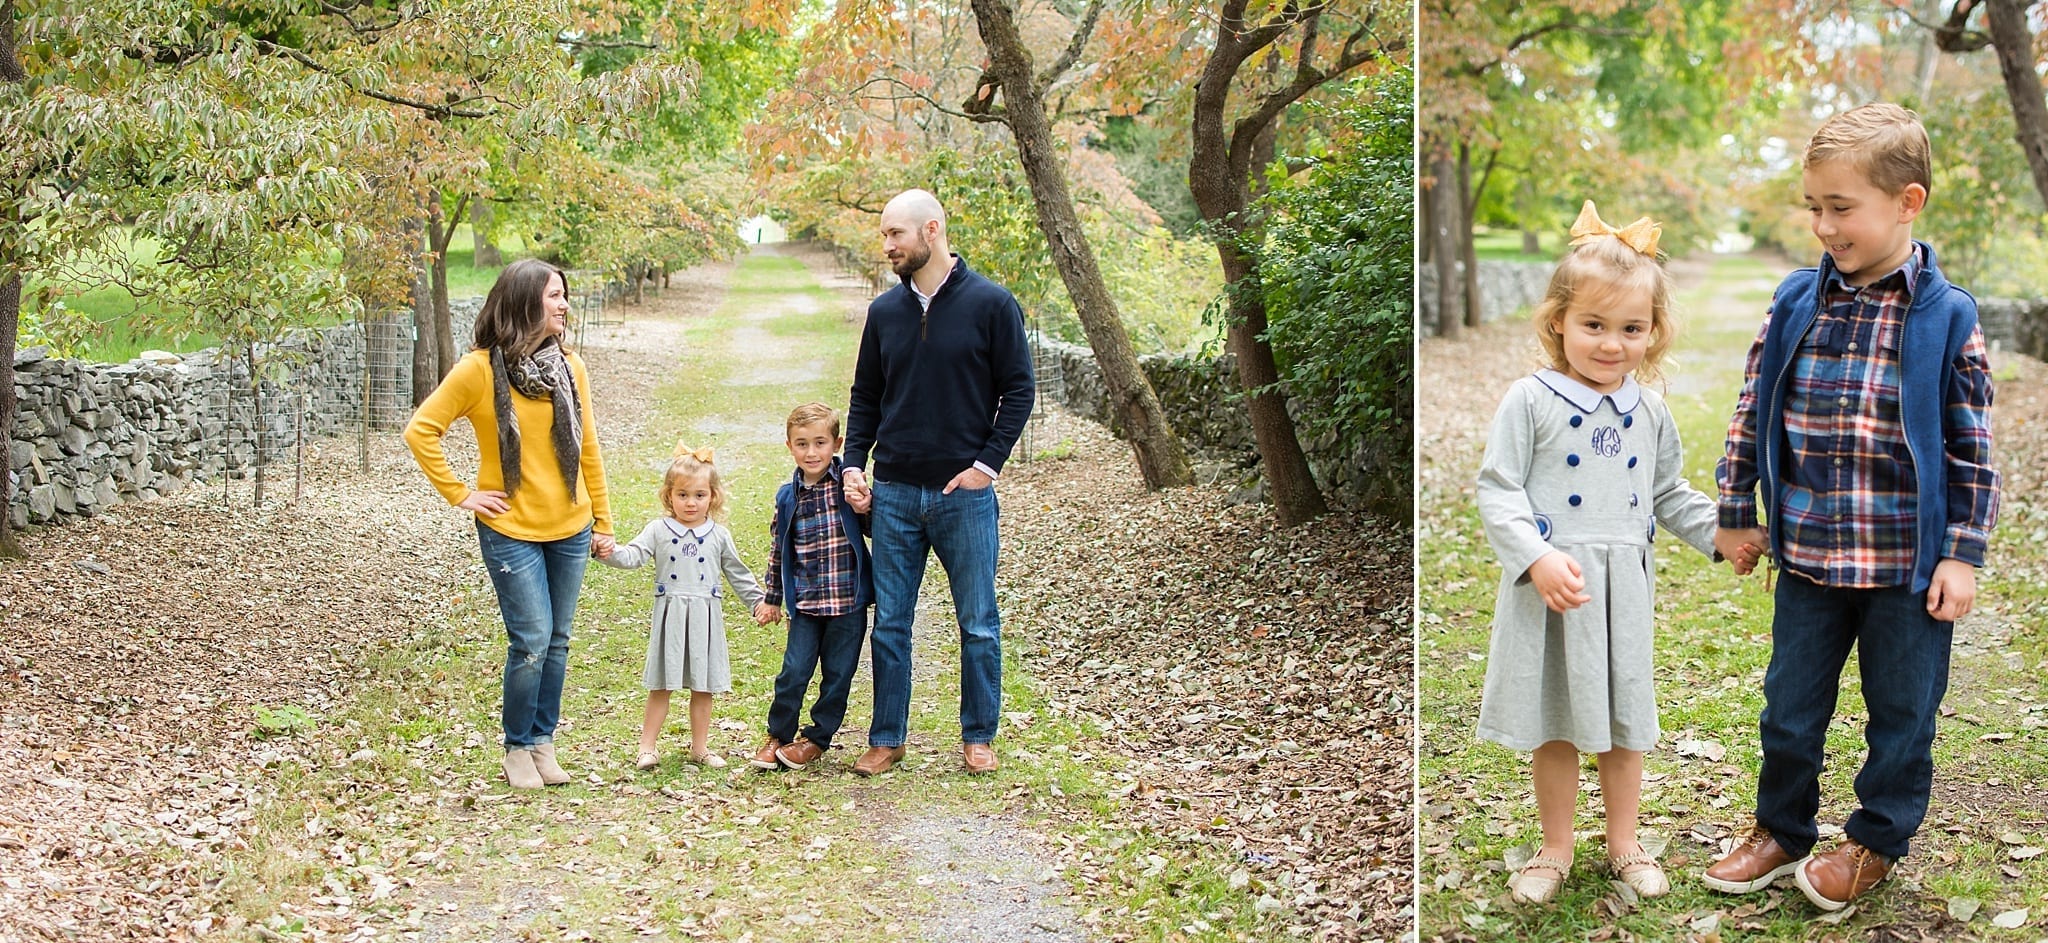 Virginia family photographer session at Blandy Experimental Farm with K. Dowler Photography